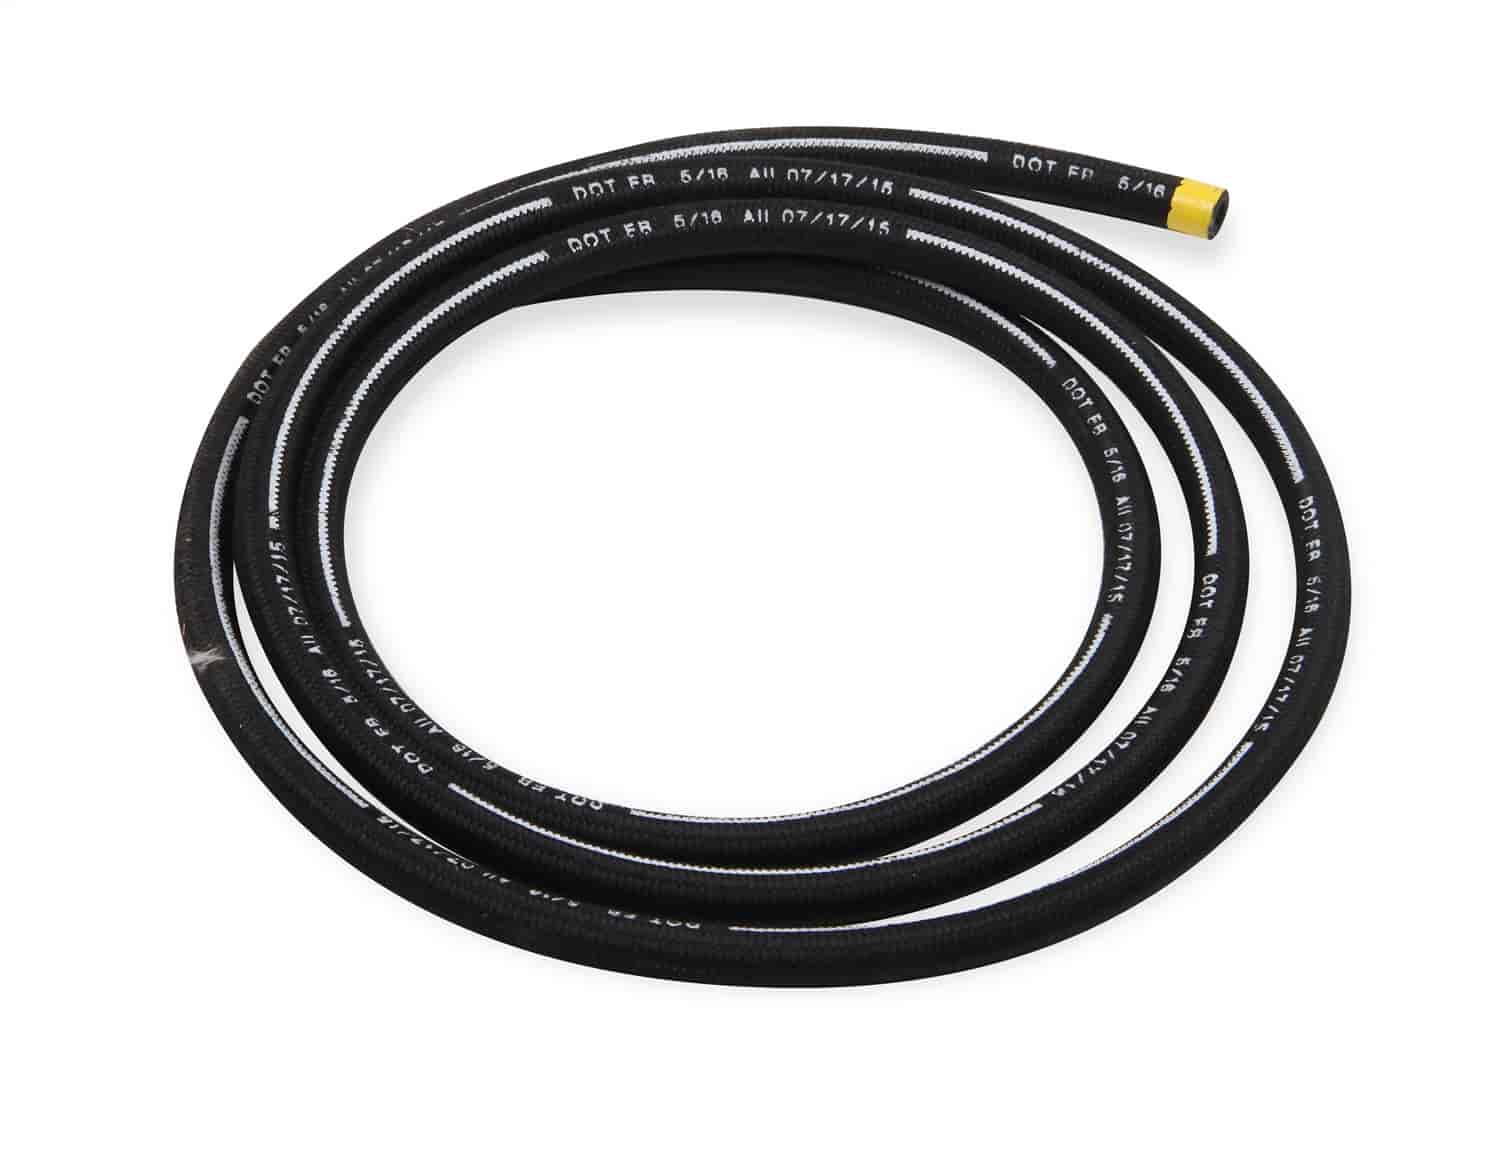 Power Steering Hose Size: -6 AN, 6 ft.